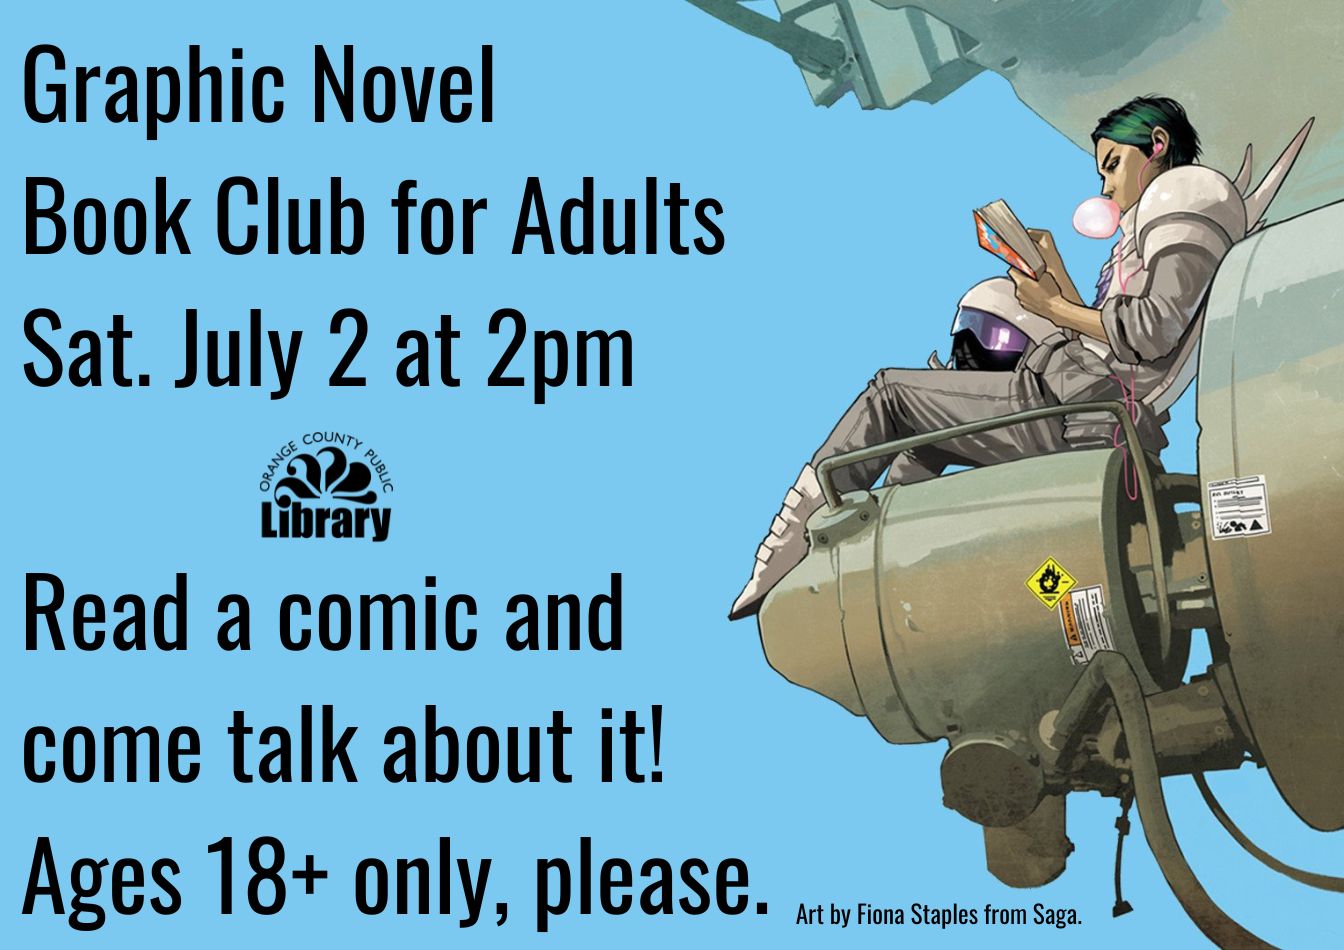 An image from the comic Saga by Fiona Staples, with the following text: "Graphic Novel Book Club for Adults Sat. July 2 at 2pm  Read a comic and come talk about it! Ages 18+ only, please."